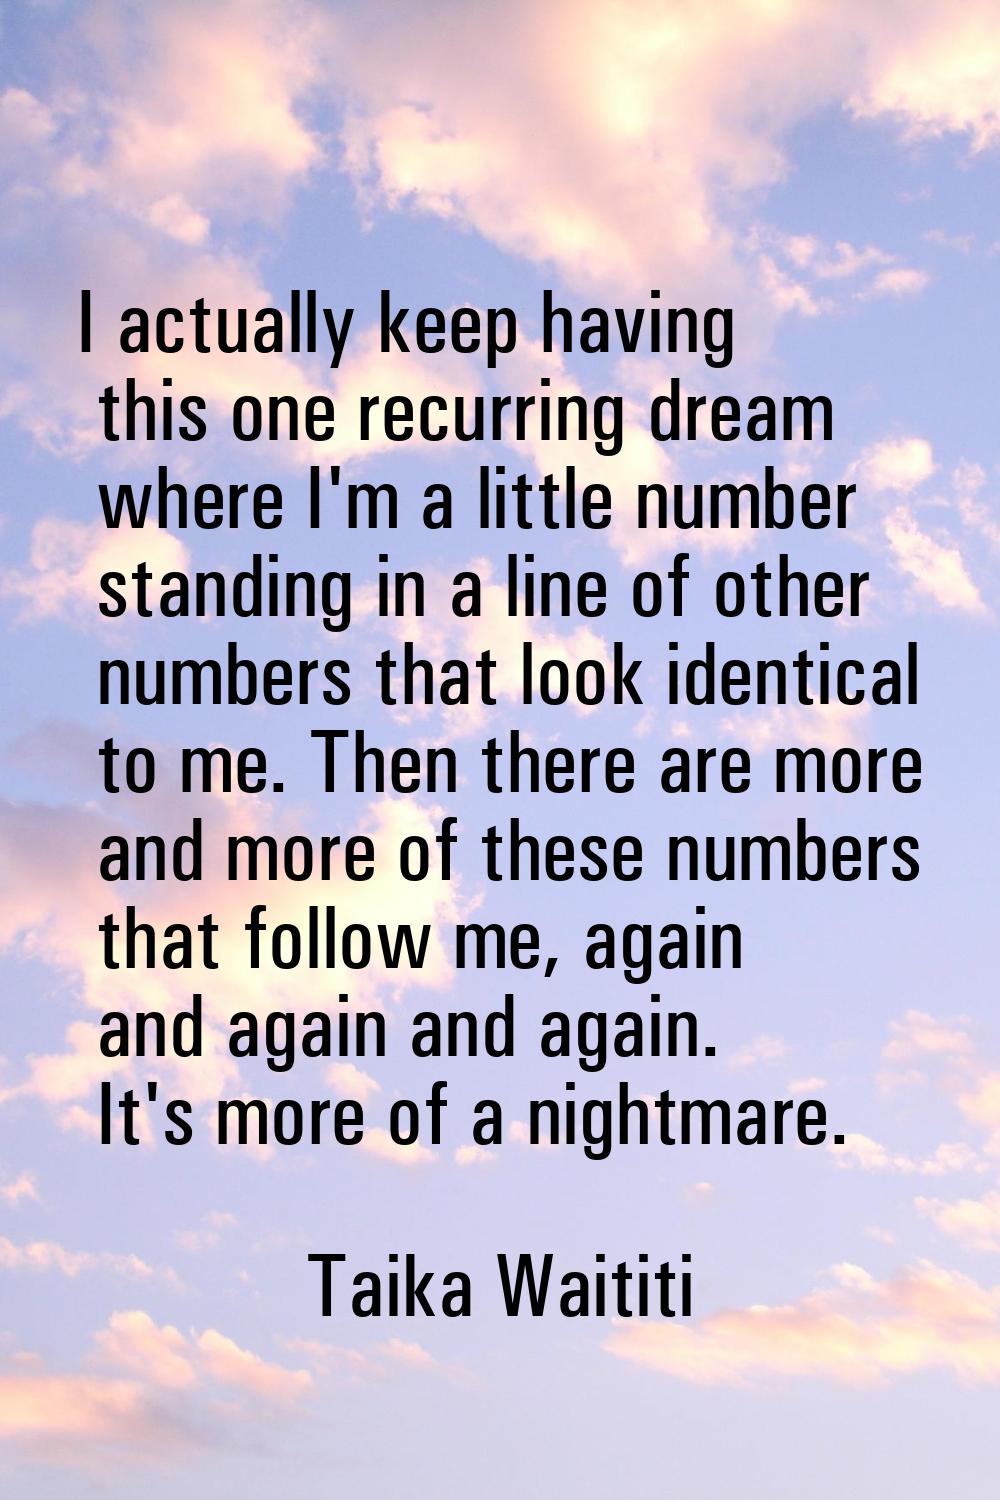 I actually keep having this one recurring dream where I'm a little number standing in a line of oth